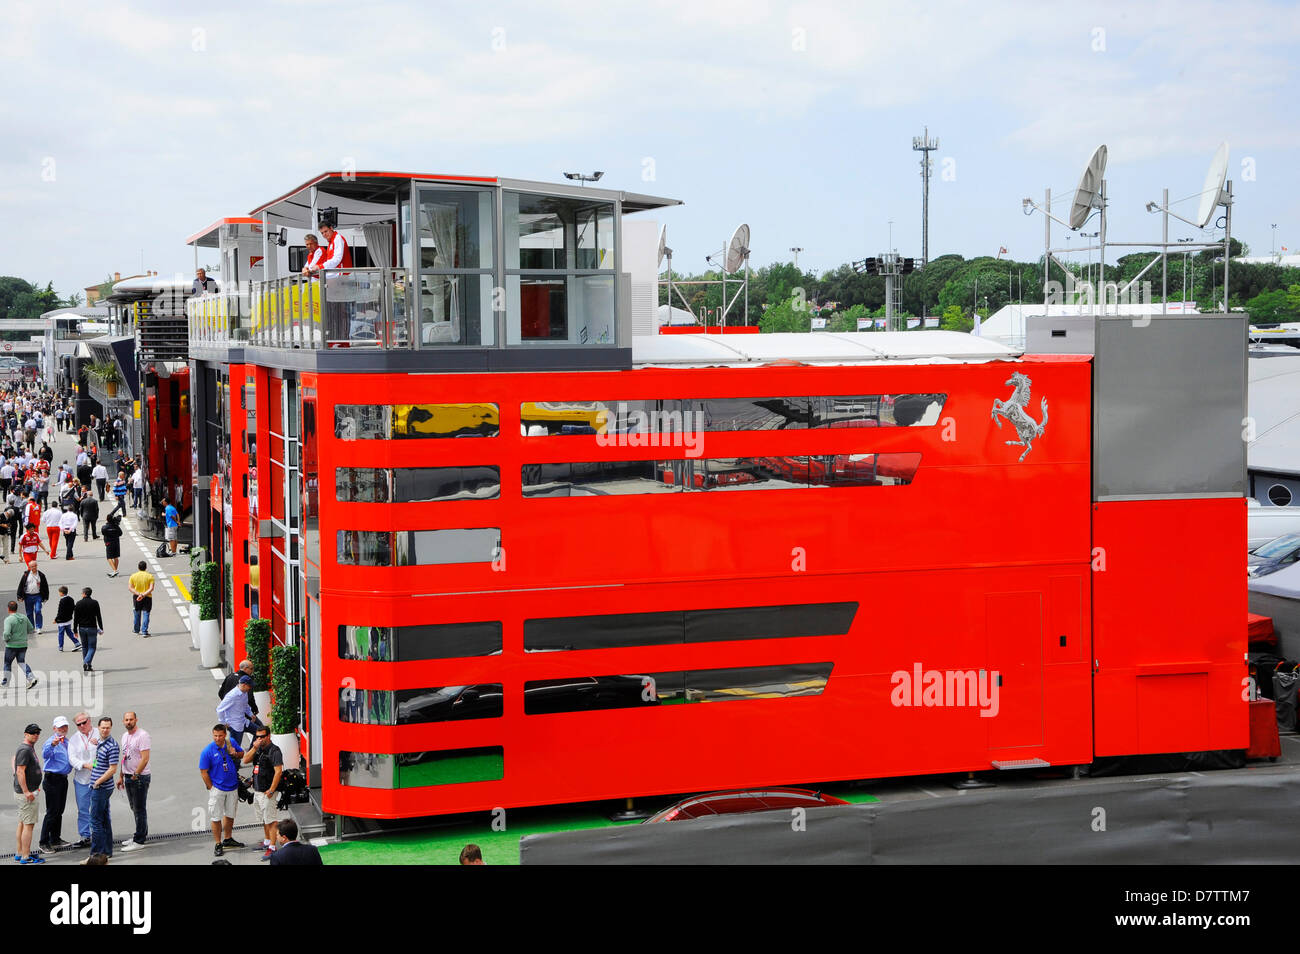 Montmelo, Spain. 12th May 2013. Ferrari Hospitality Motorhome during the Formula One Grand Prix of Spain on Circuit de Catalunya race track in Montmelo near Barcelona, SpainCredit: Kolvenbach/Alamy Live News Stock Photo